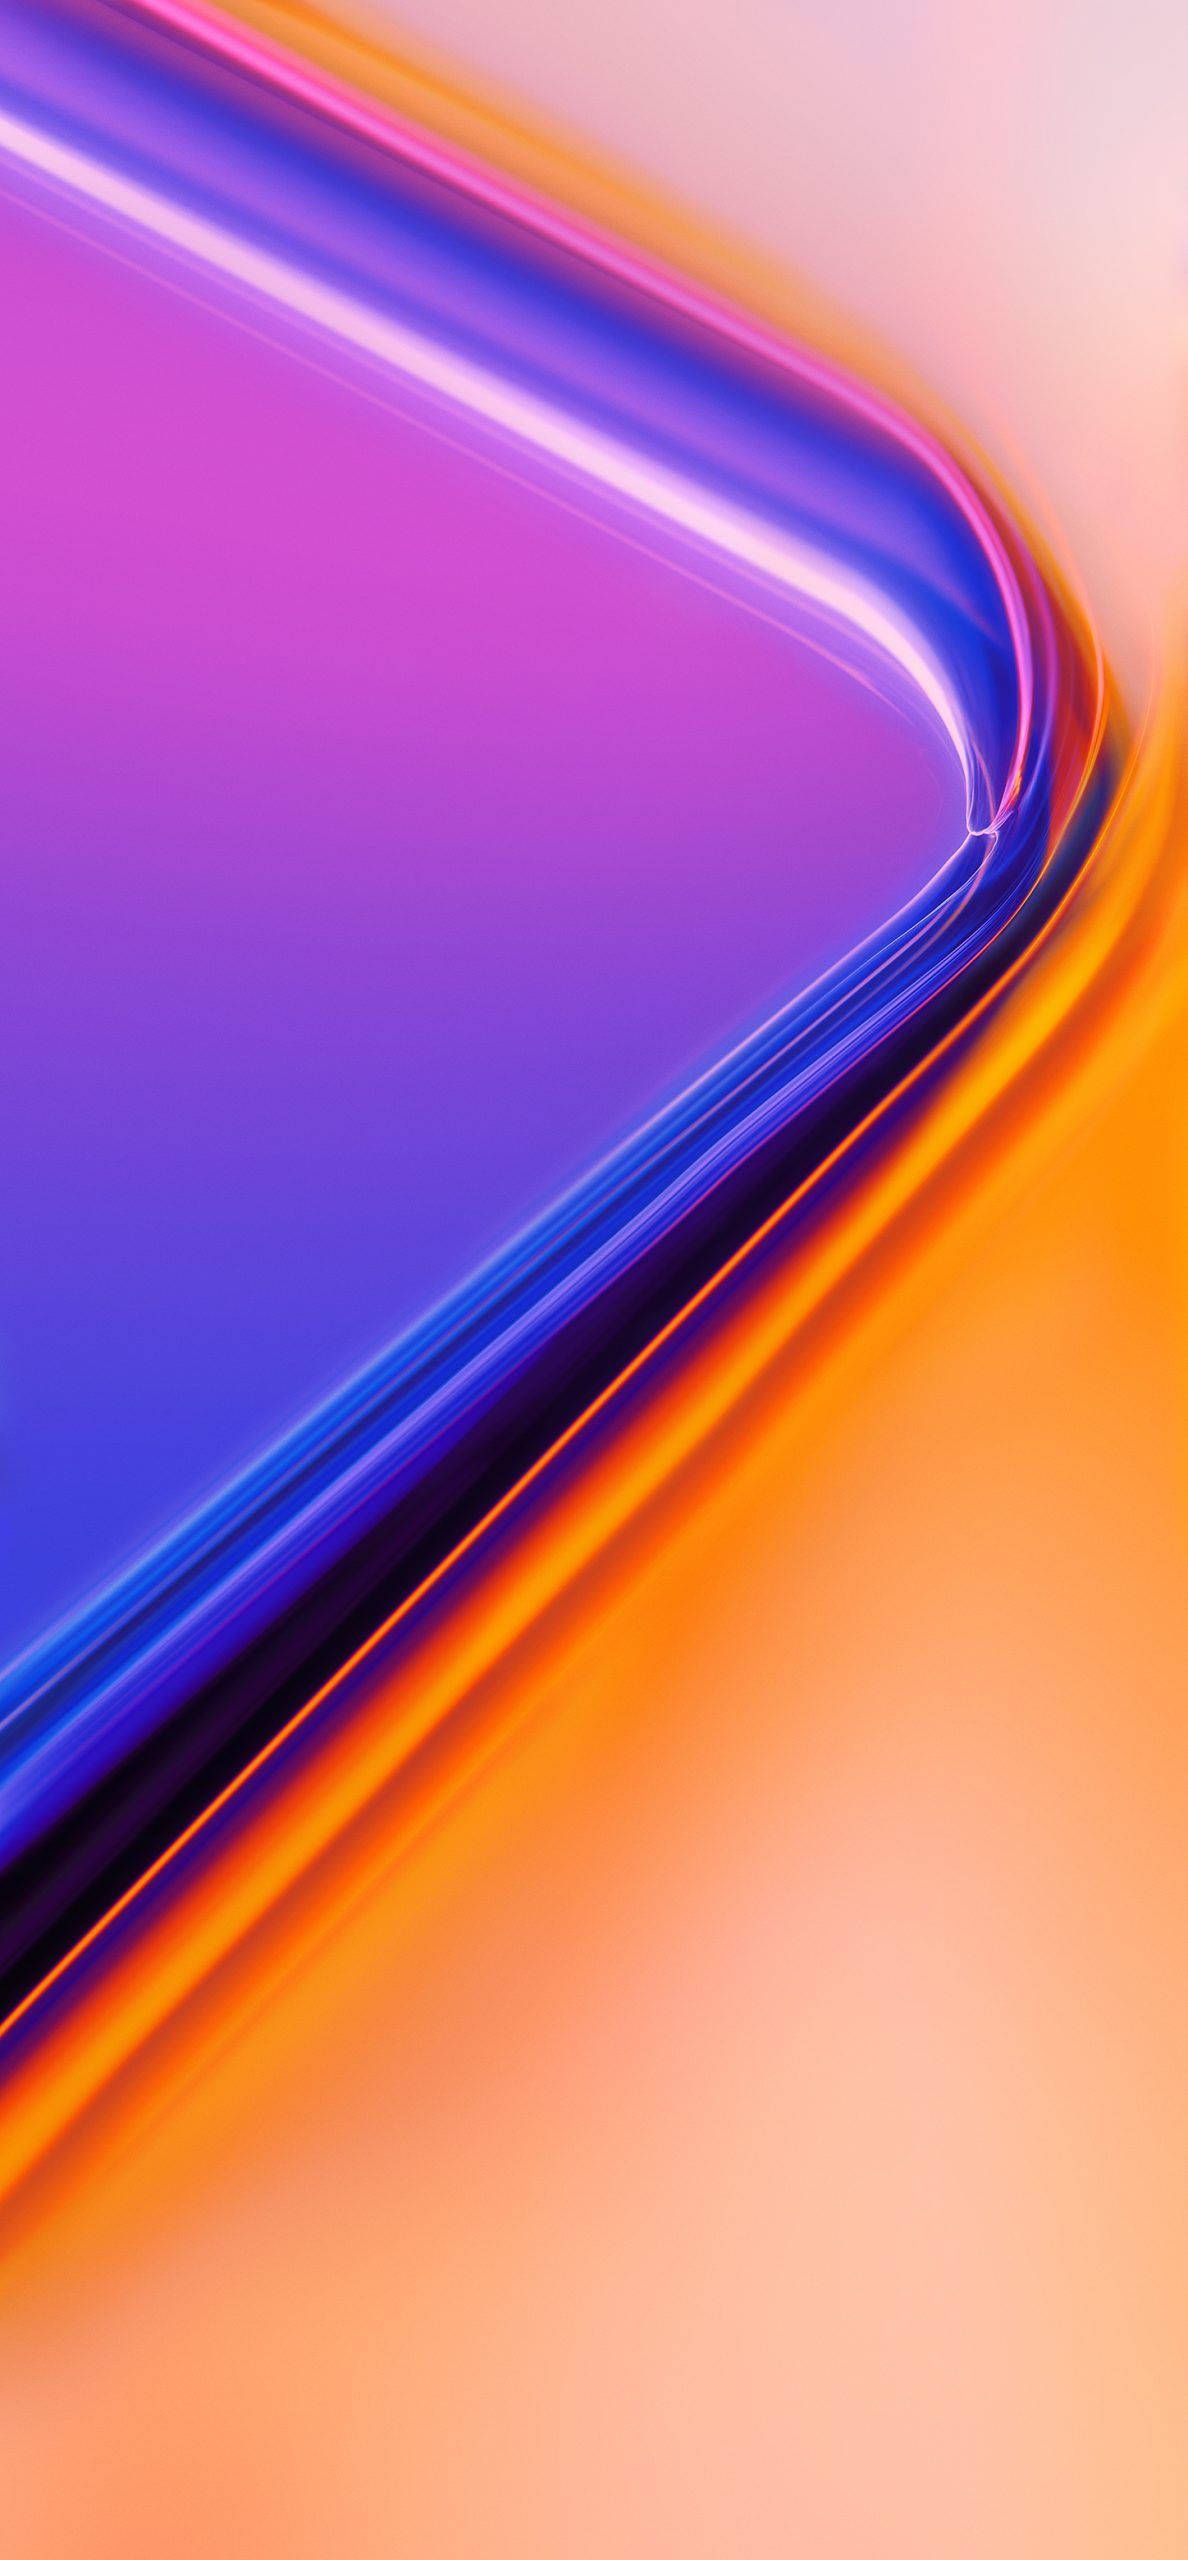 Abstract For Oneplus 8 Pro Display Wallpaper